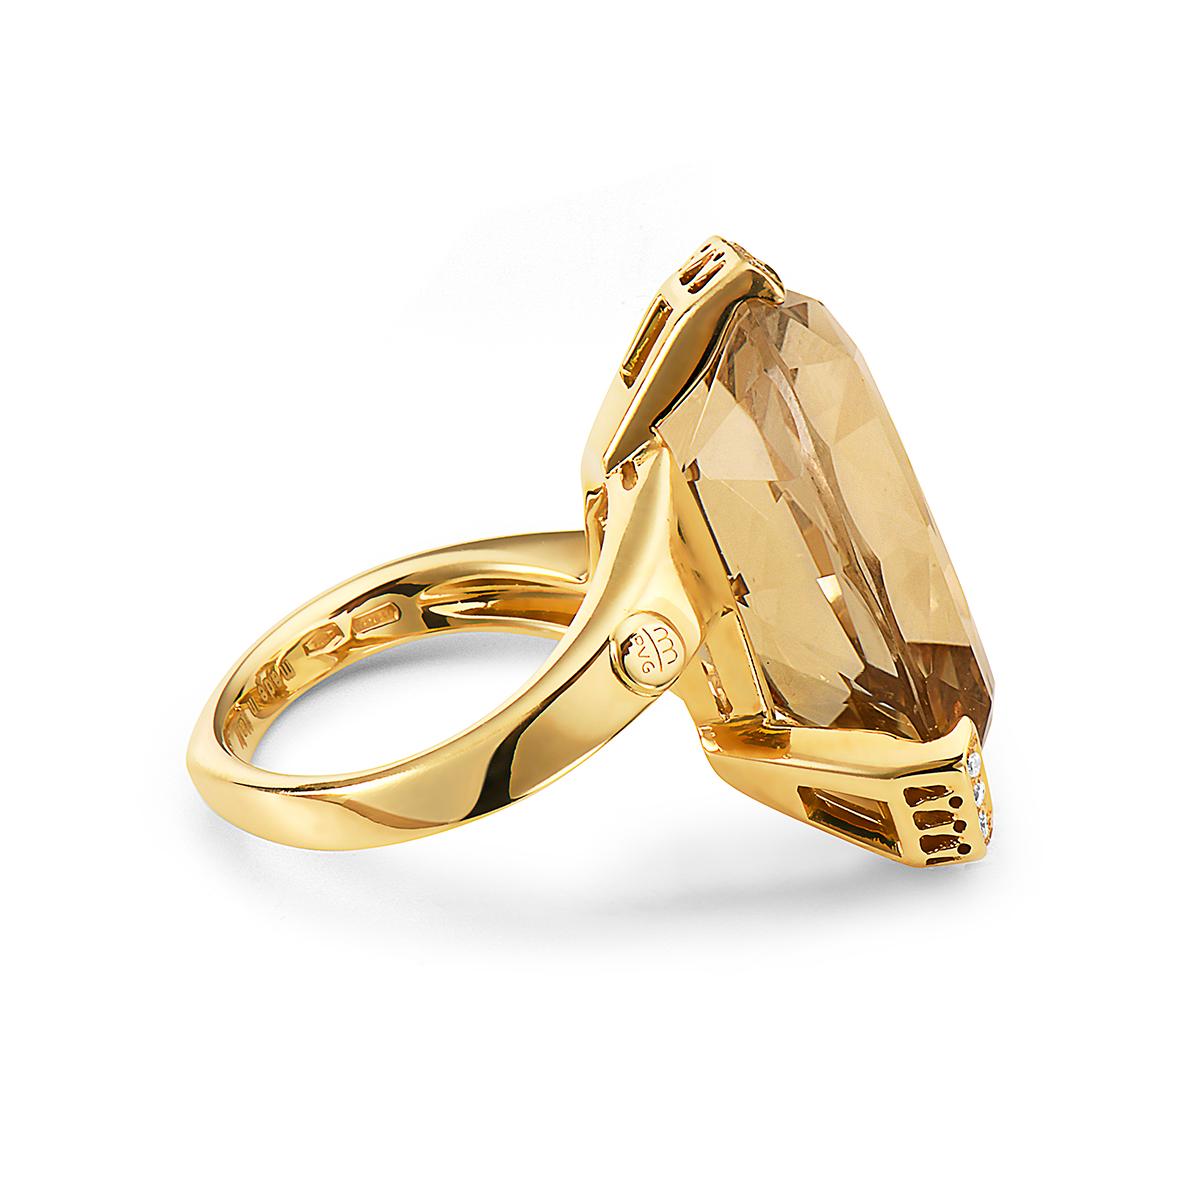 This 18K yellow gold Ponte Vecchio Gioielli cocktail ring features a 26.10 carat faceted pear shape citrine and 0.14 carats of round brilliant cut diamonds. Size 7. Made in Italy. Signed PVG.
Stone Count: 16
Marks: 750, Designer Signature, Maker's